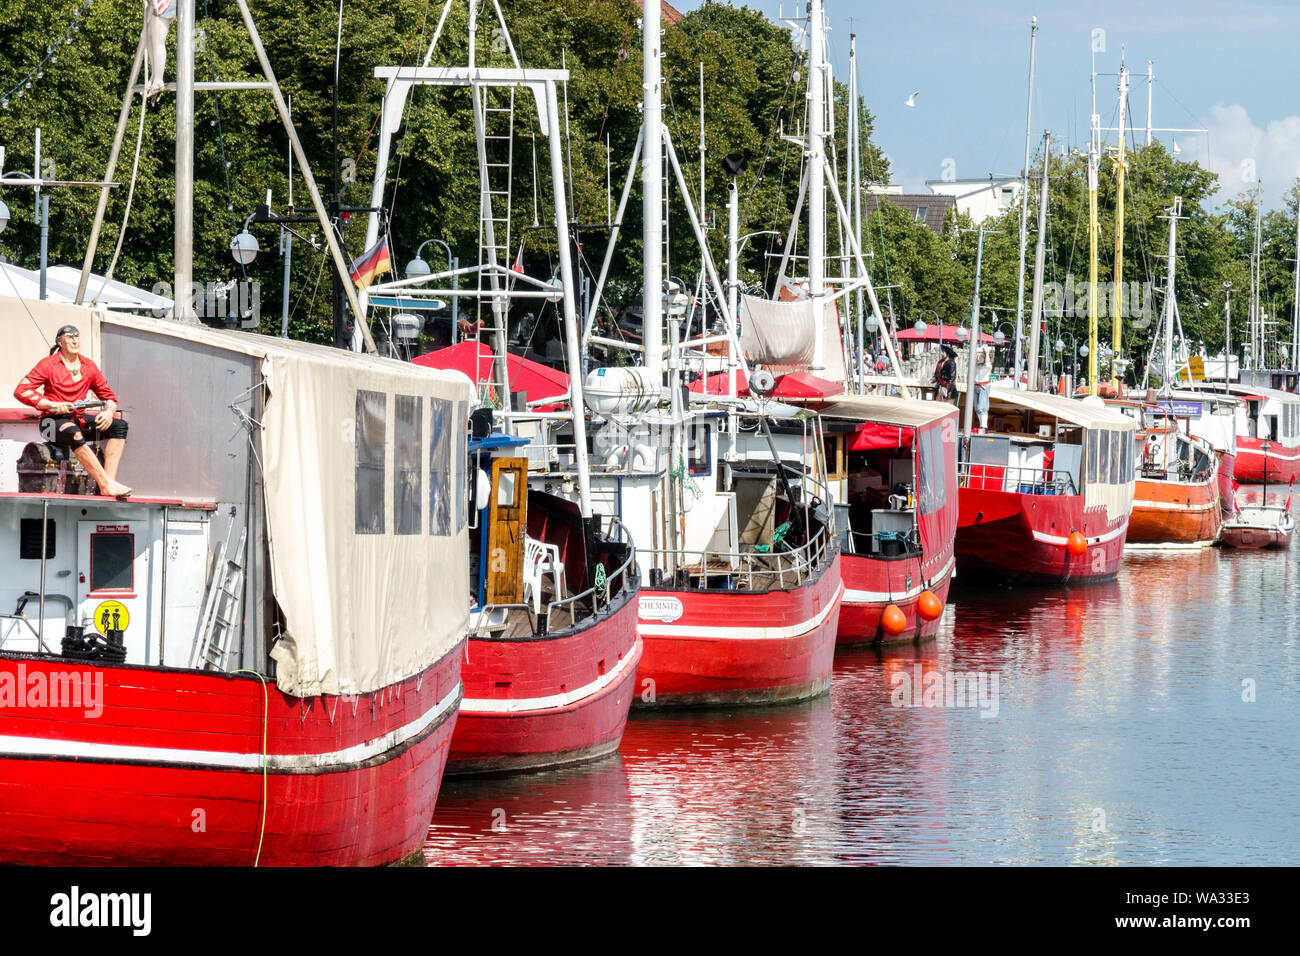 Warnemunde harbor, fishing boats moored in Old Canal, Alter Strom, Rostock Germany Stock Photo